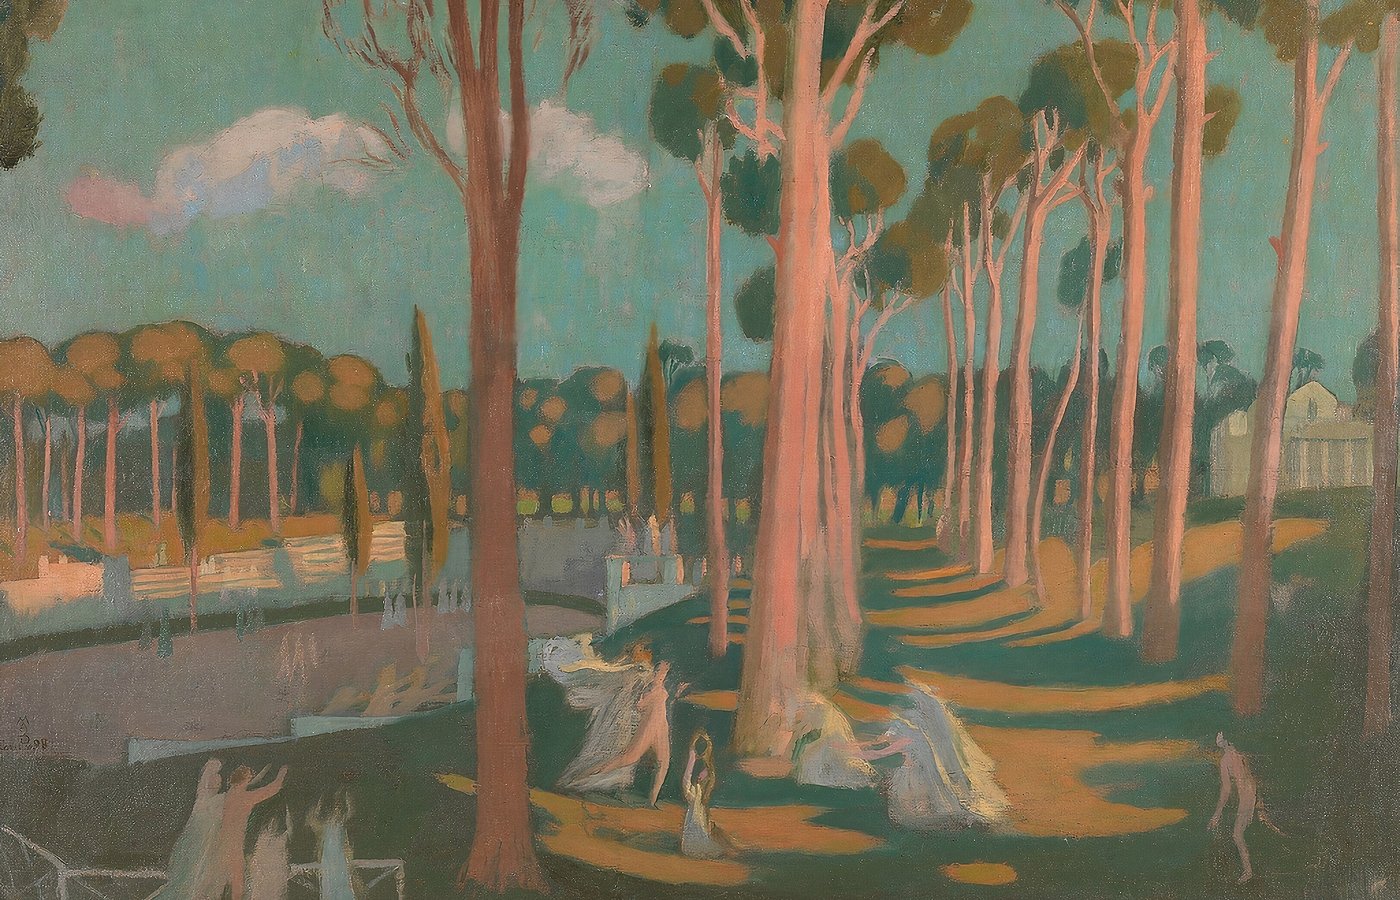  3243px Maurice Denis   Classical Landscape with Figures   69 203   Rhode Island School of Design Museum 